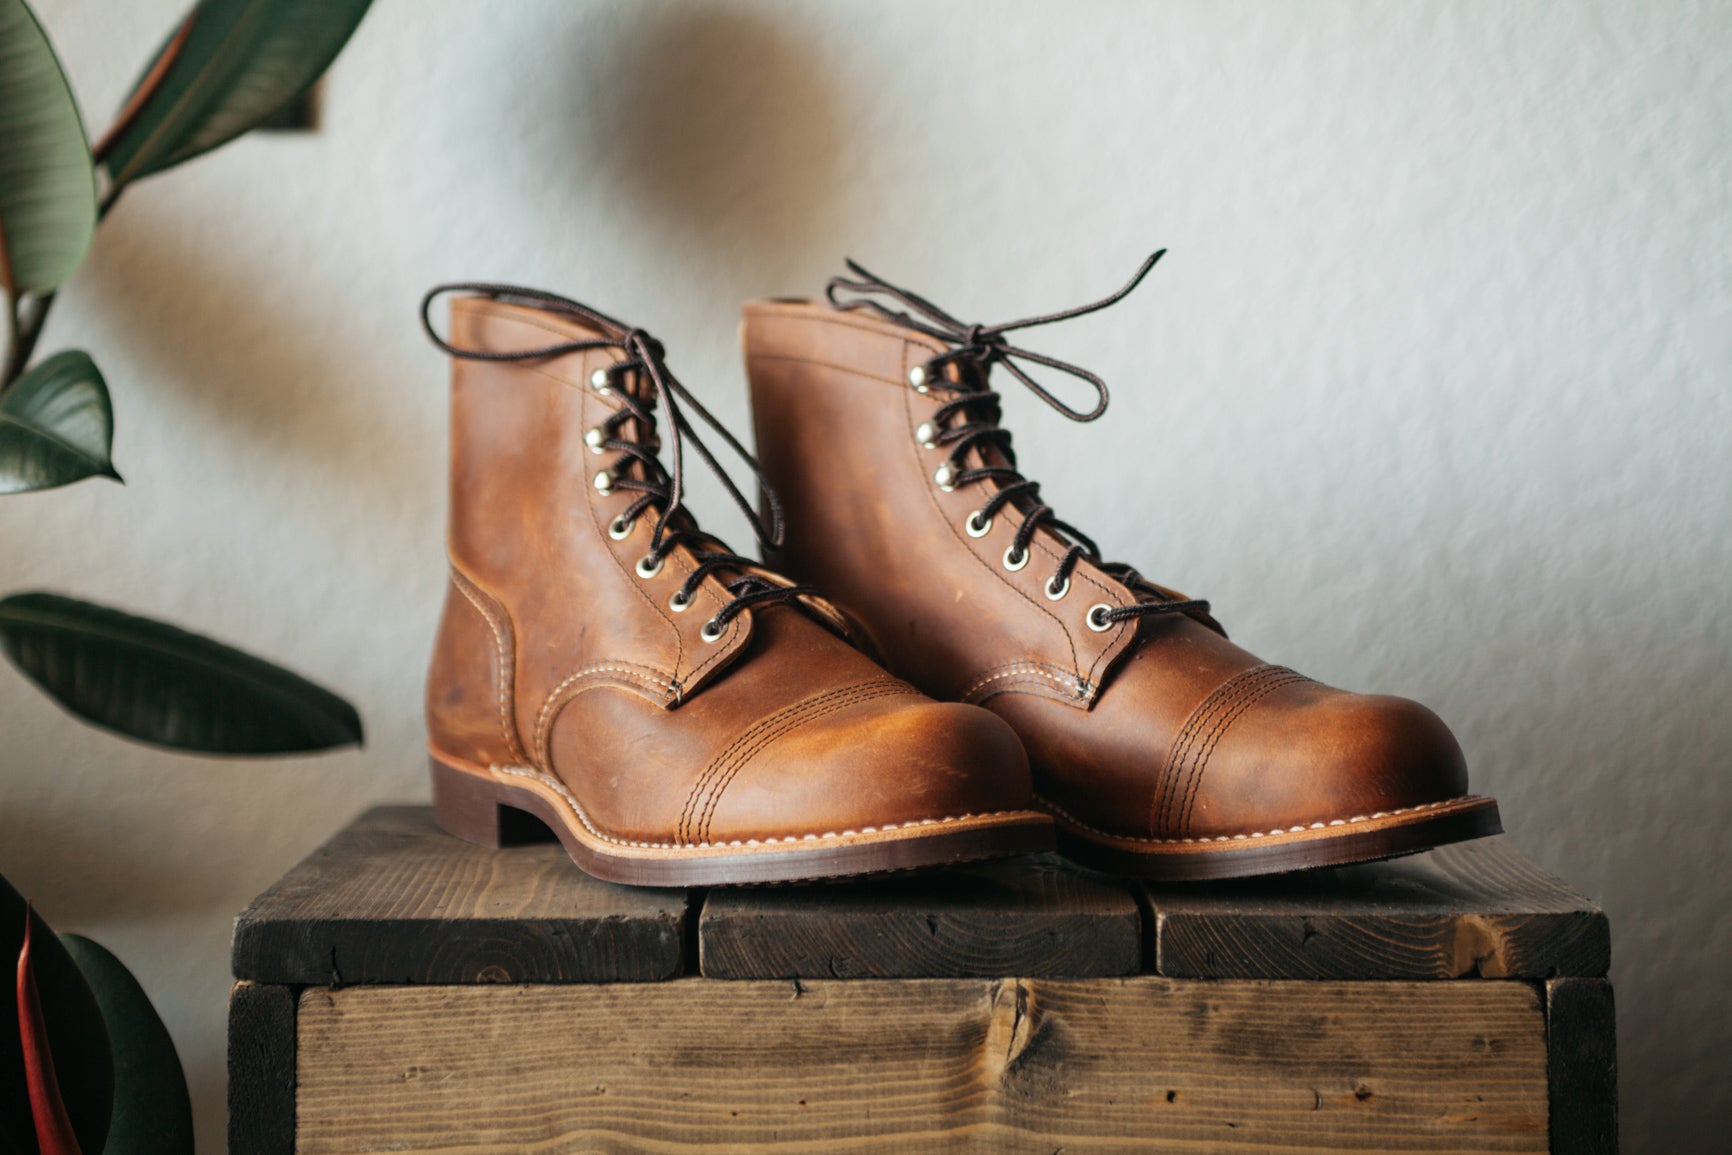 red wing iron rangers copper